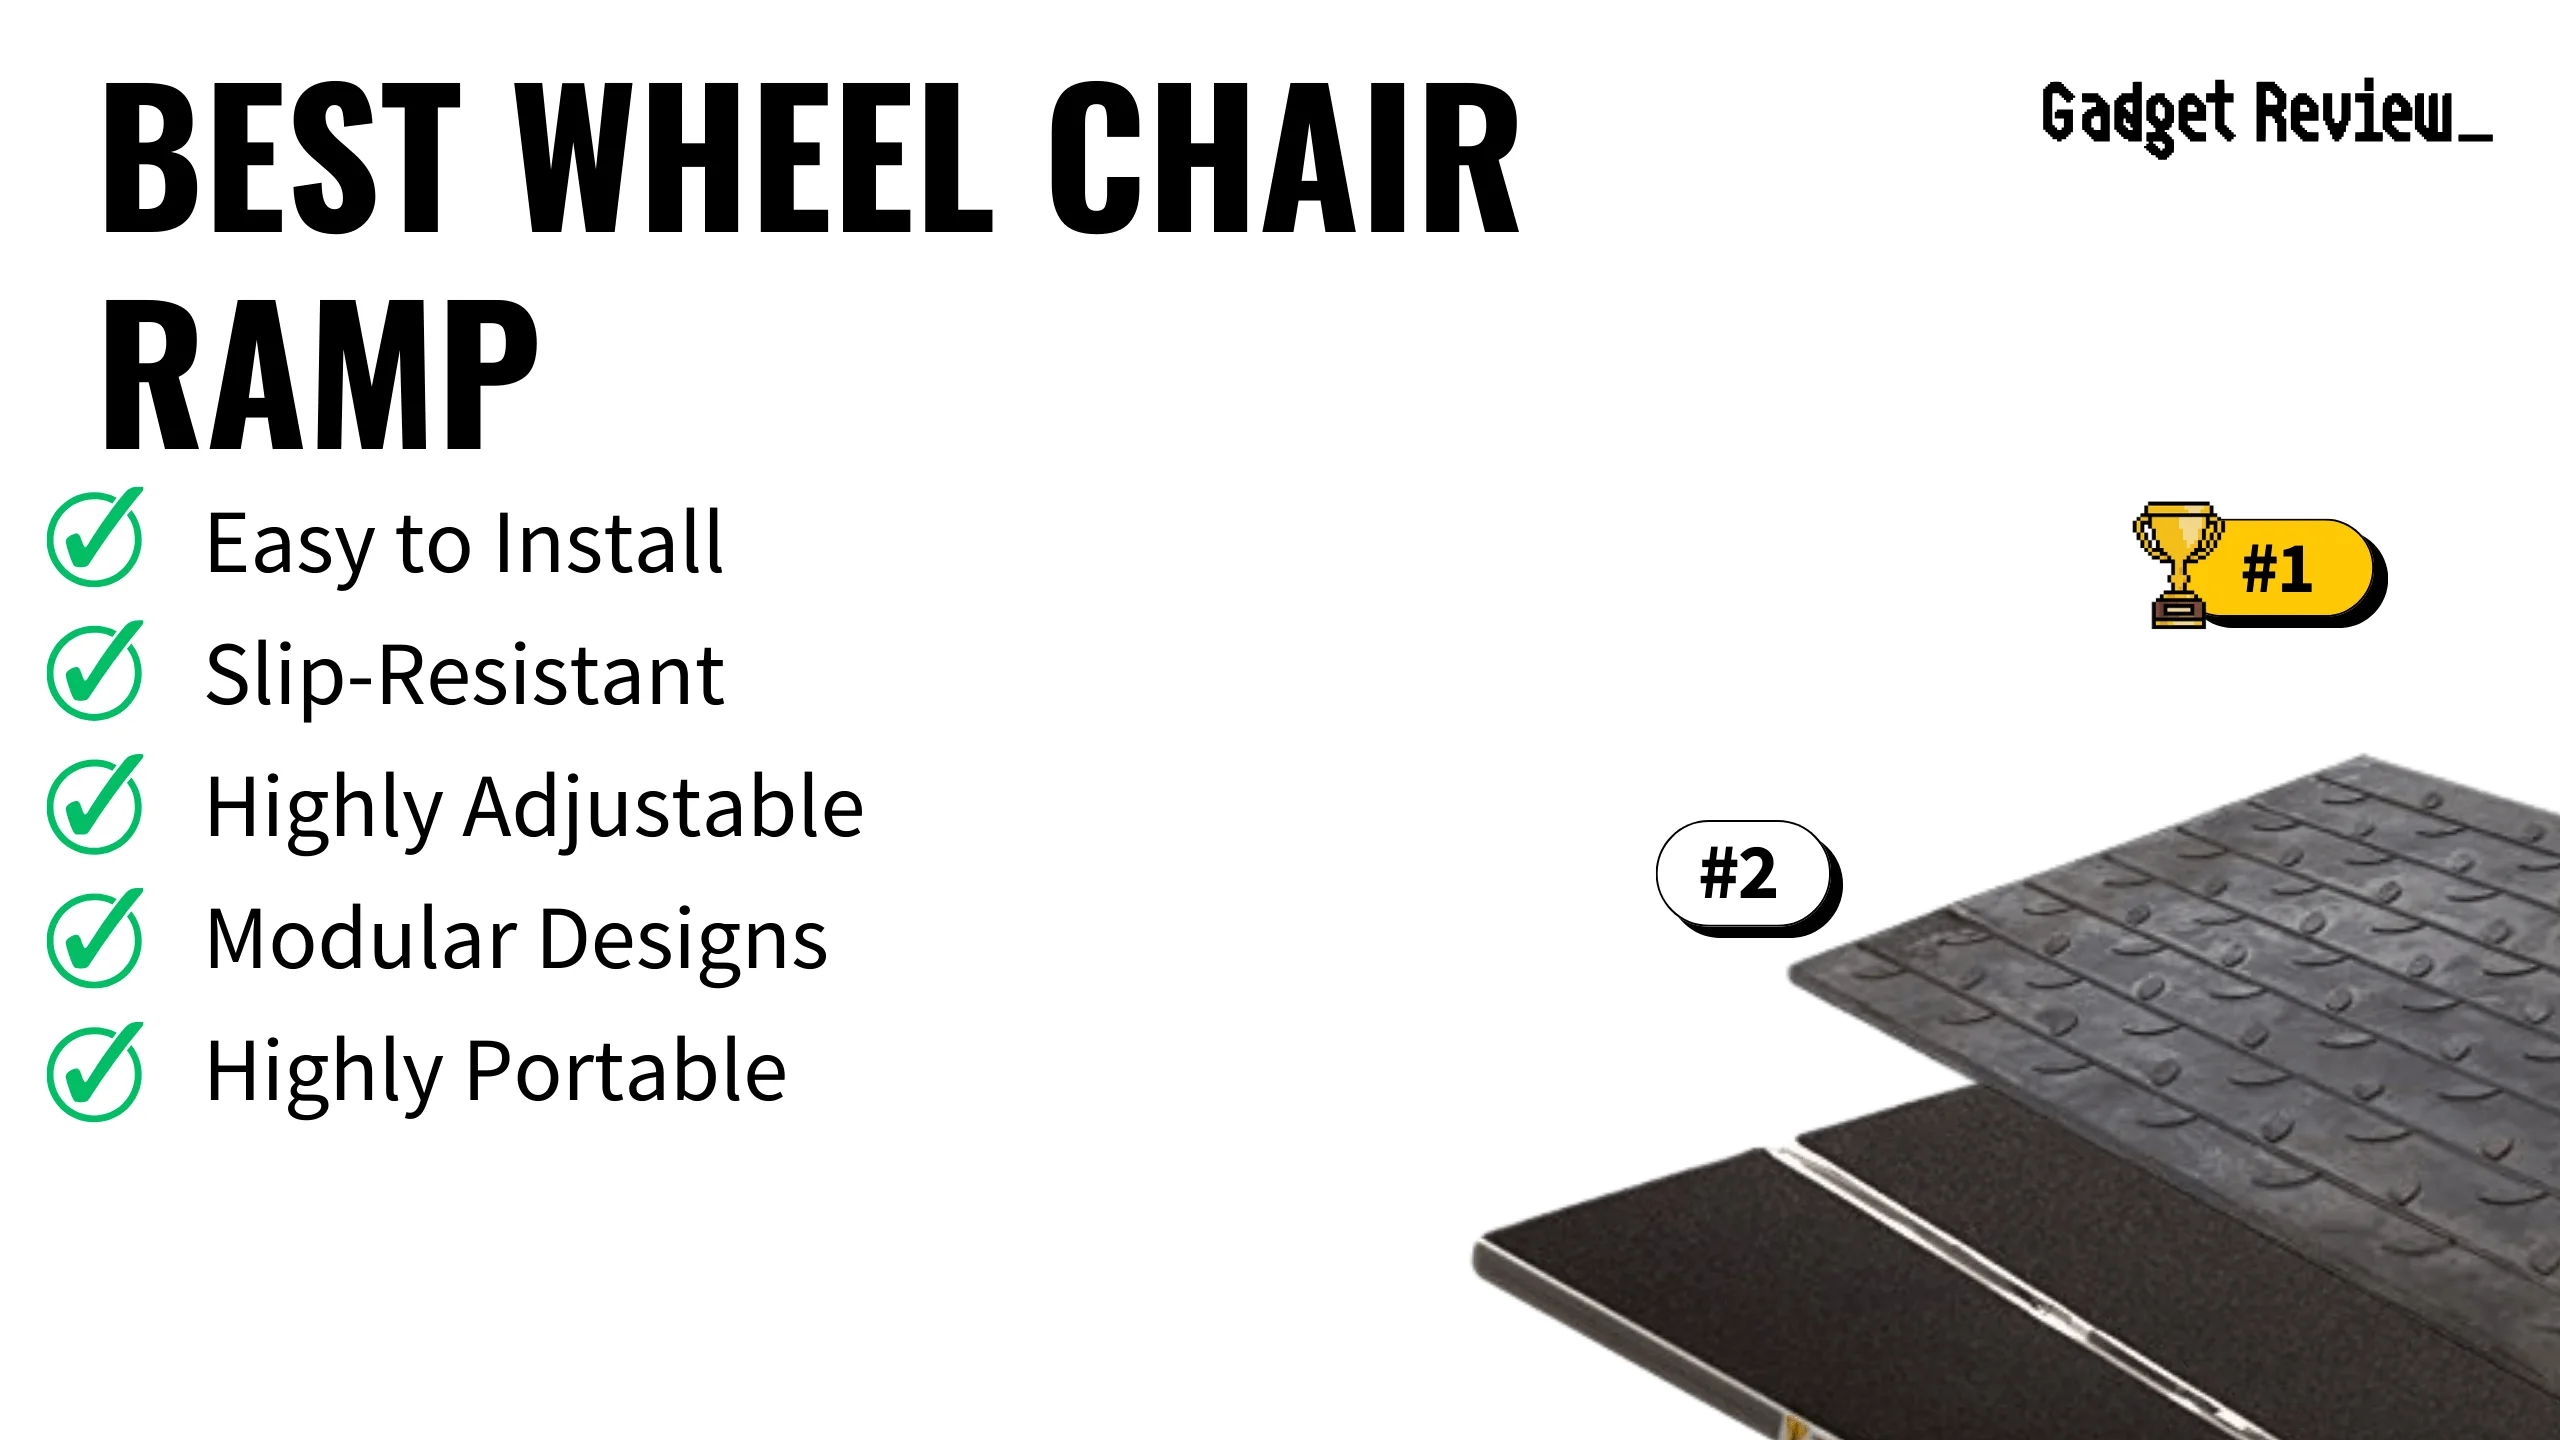 best wheel chair ramp featured image that shows the top three best health & wellnes models